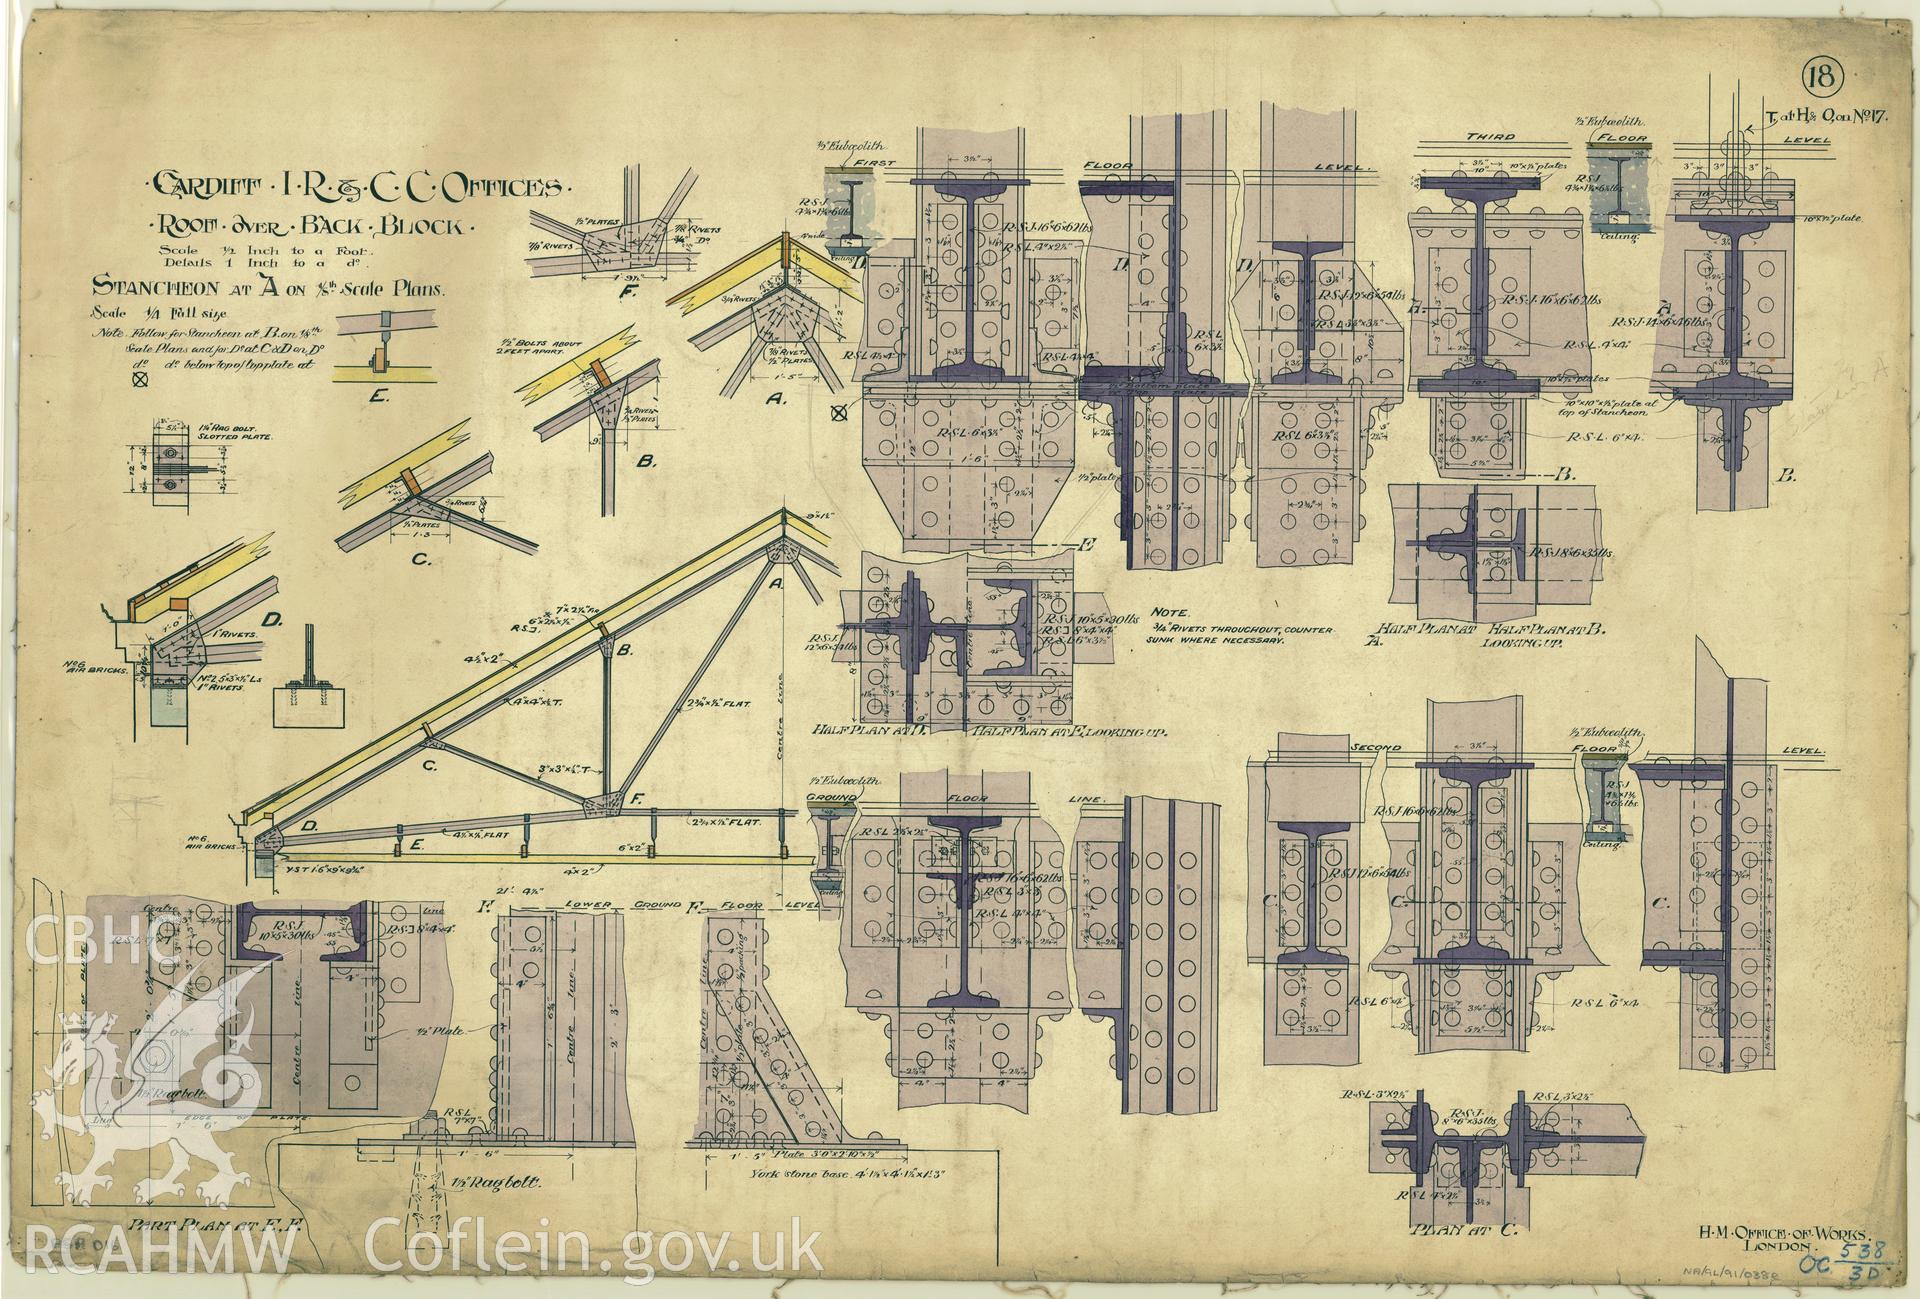 Cardiff Inland Revenue and County Court Offices; measured drawing showing detail of stancheon in room over back block, produced by H.M. Office of Works,  undated.